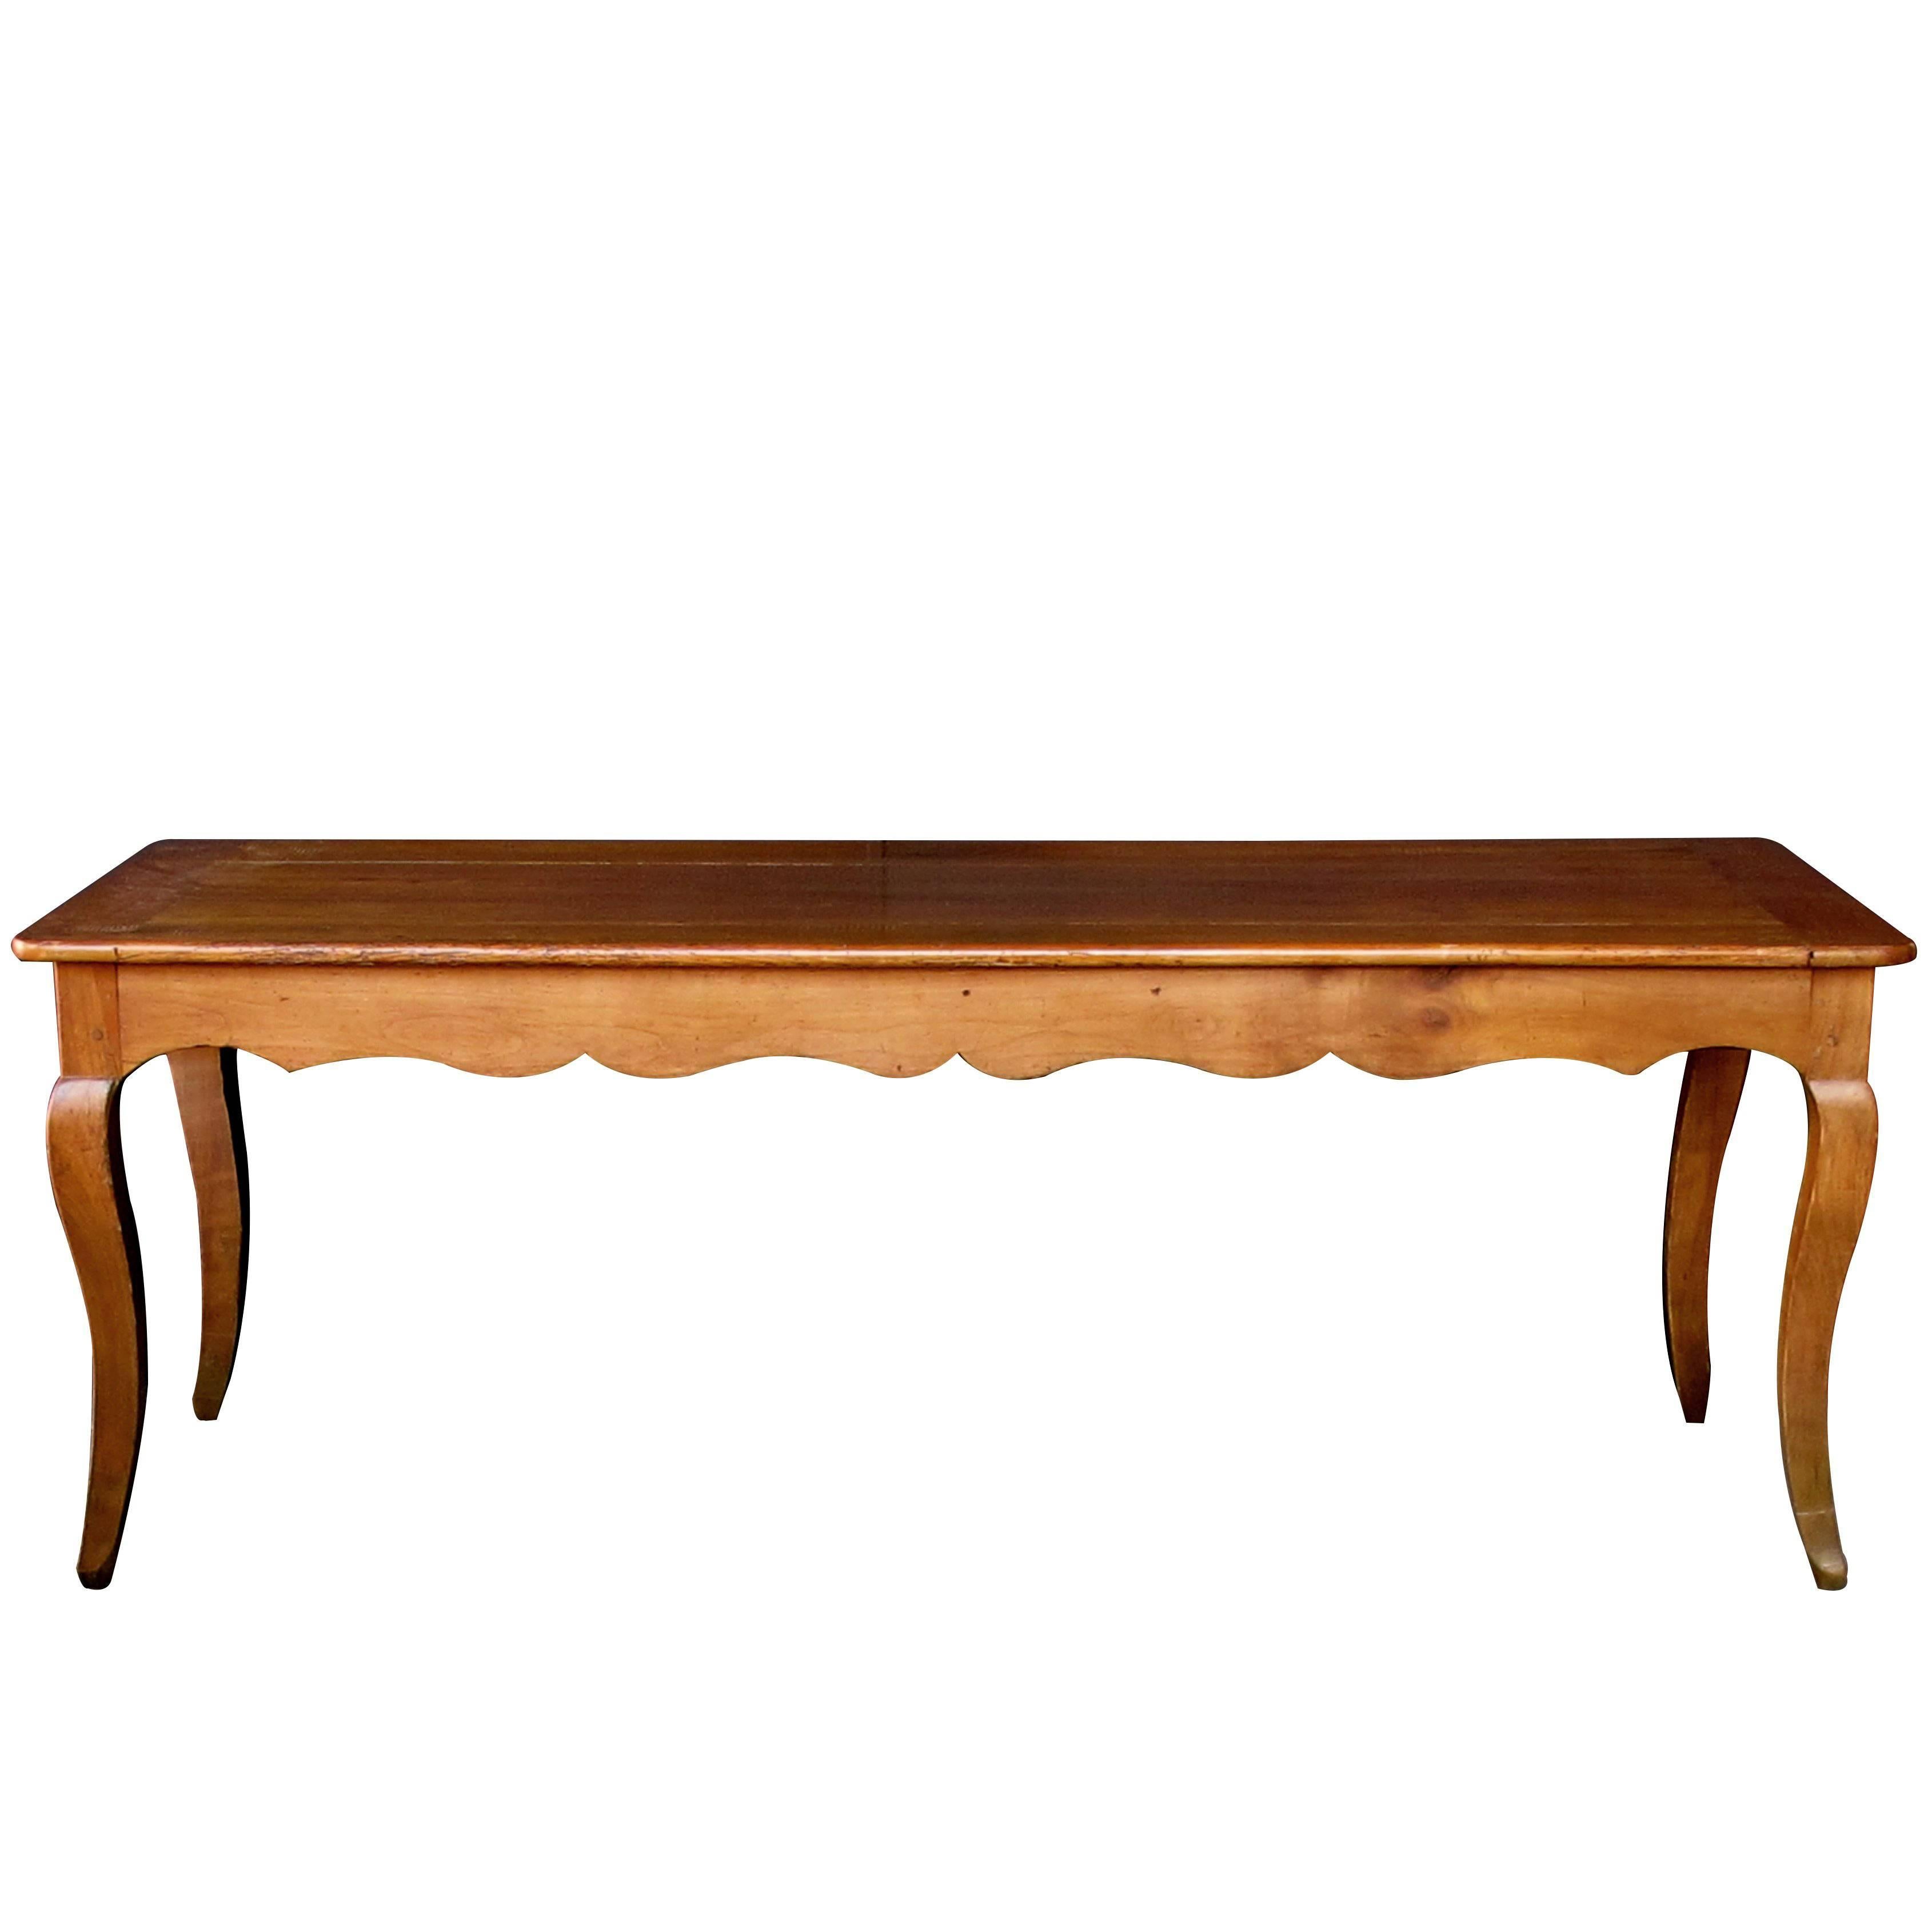 Rustic and Sturdy French Country Cherrywood Farm Table with Drawer and Slide